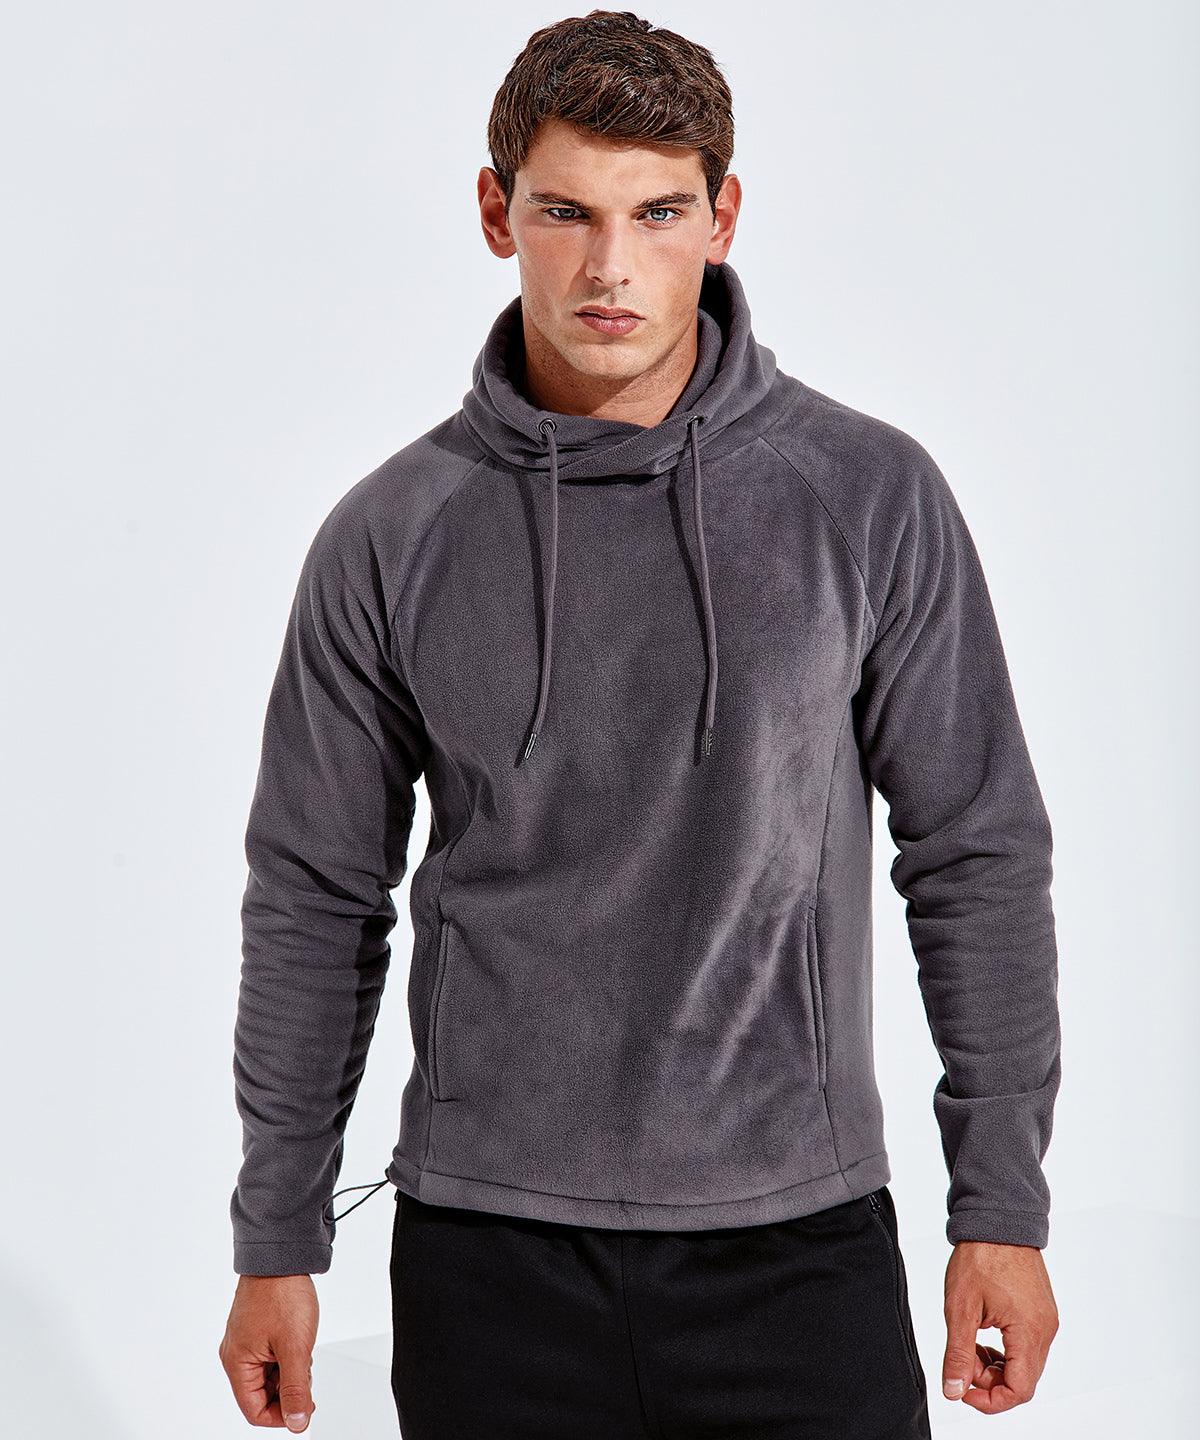 Charcoal - Men's TriDri® microfleece hoodie Hoodies TriDri® Everyday Essentials, Exclusives, Home of the hoodie, Hoodies, Lounge Sets, New For 2021, New In Autumn Winter, New In Mid Year, Working From Home Schoolwear Centres